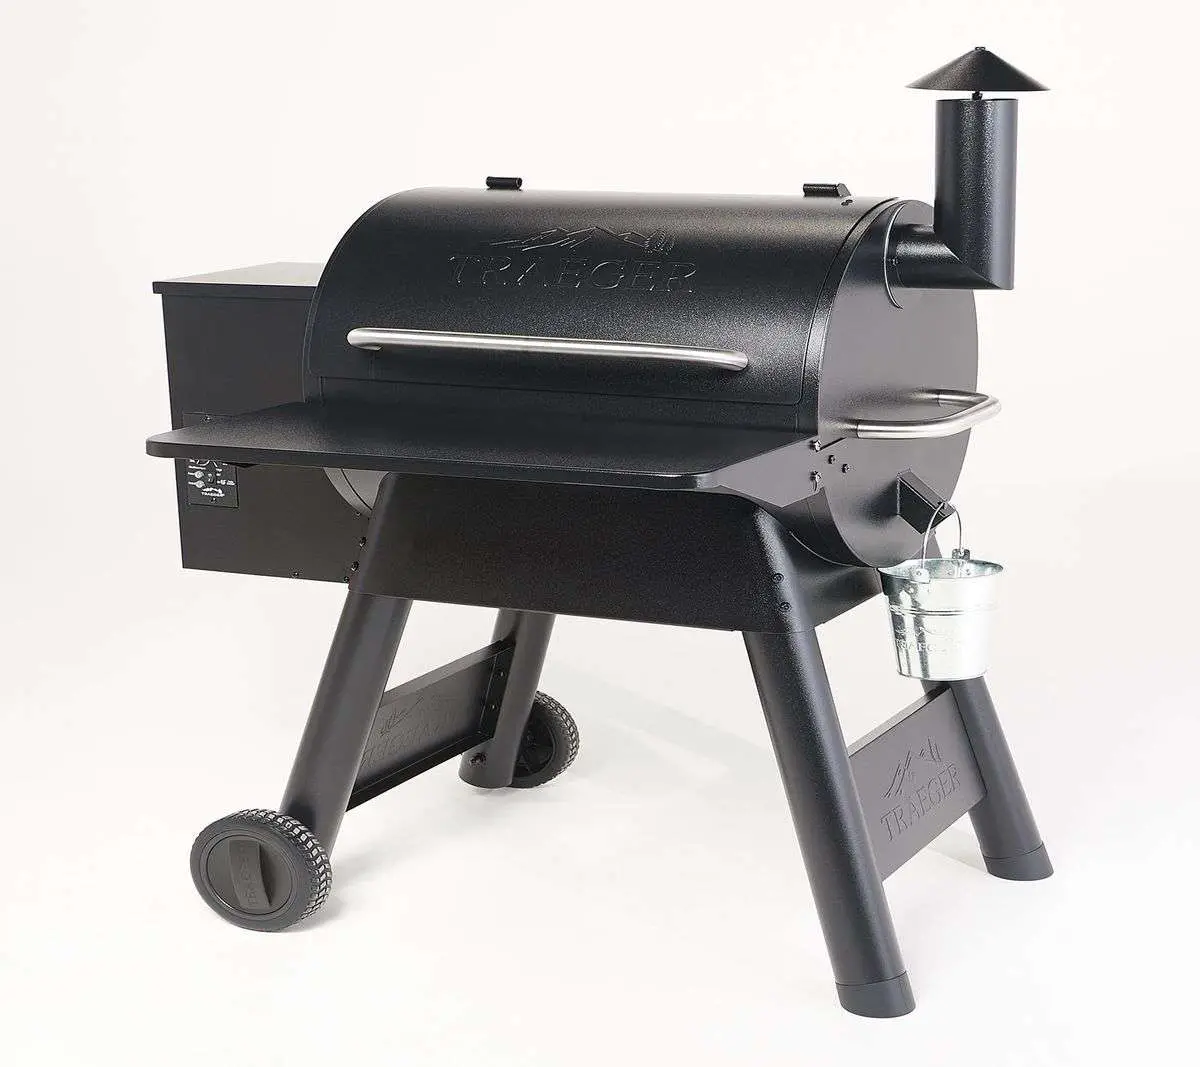 Best deal EVER on Traeger grill